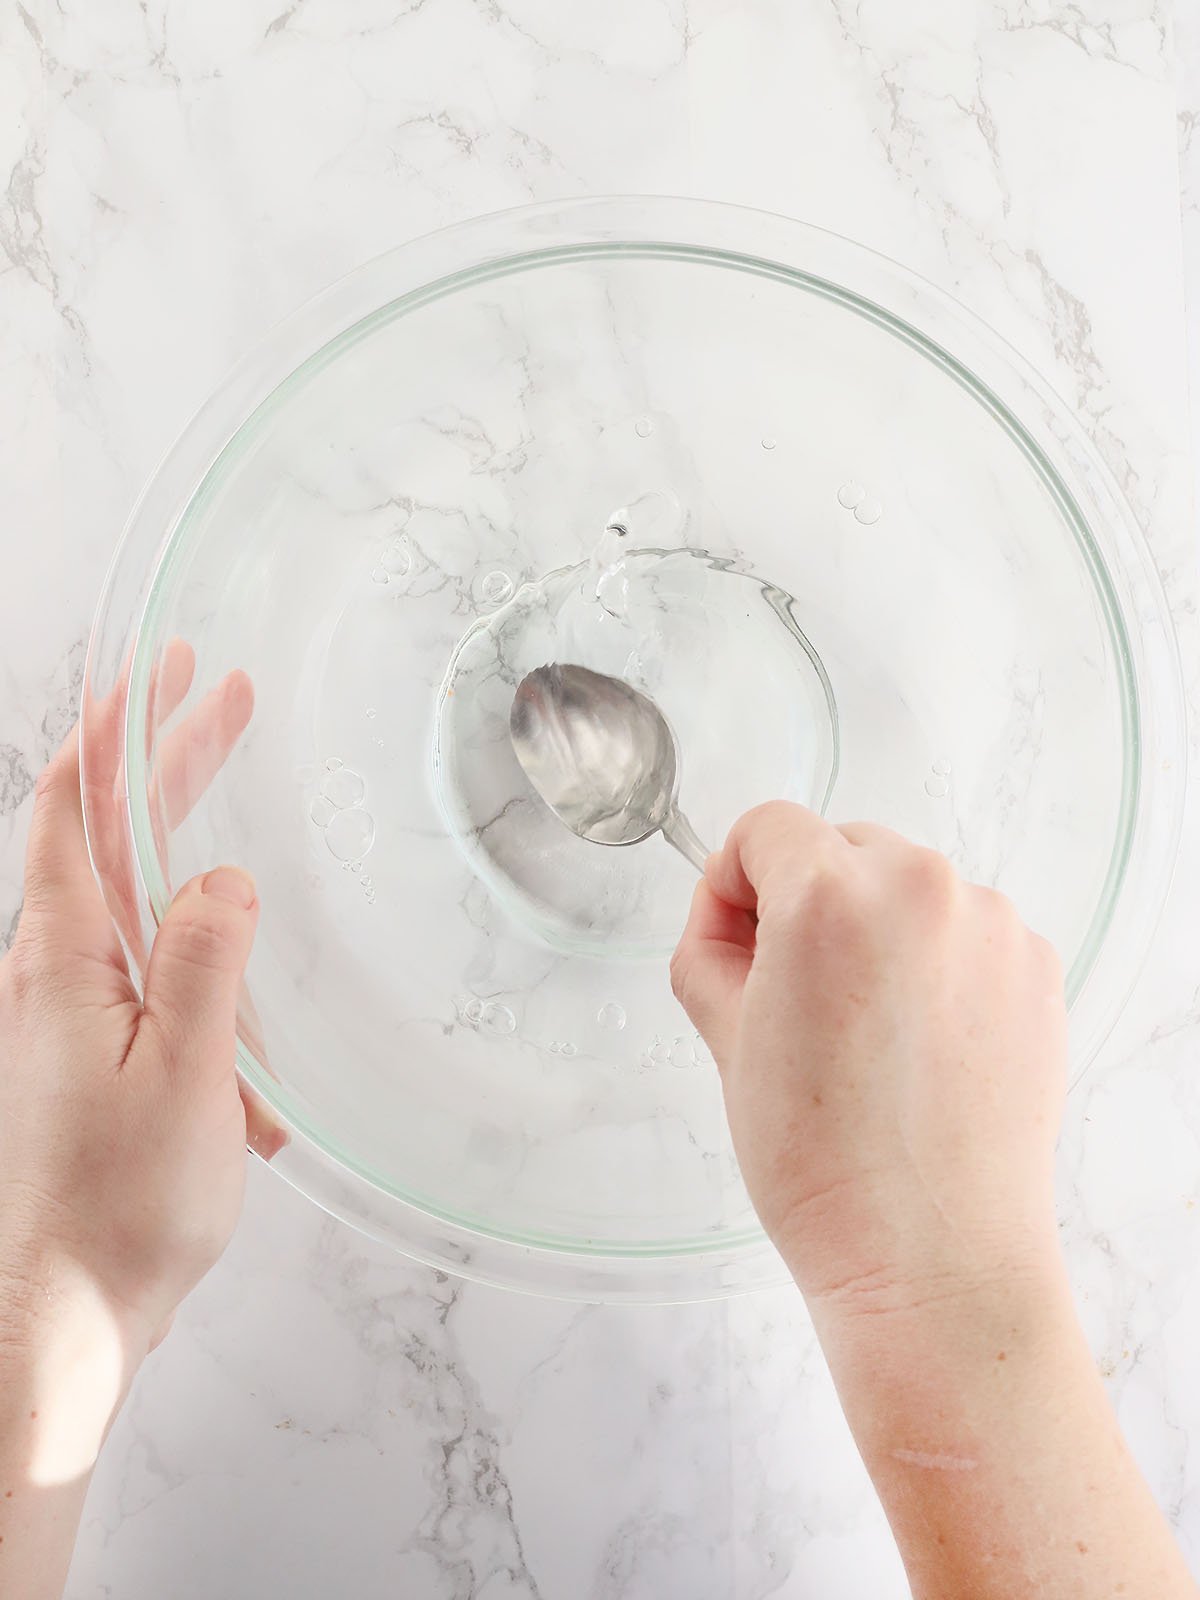 Hand dissolving the baking soda in a mixing bowl of water.